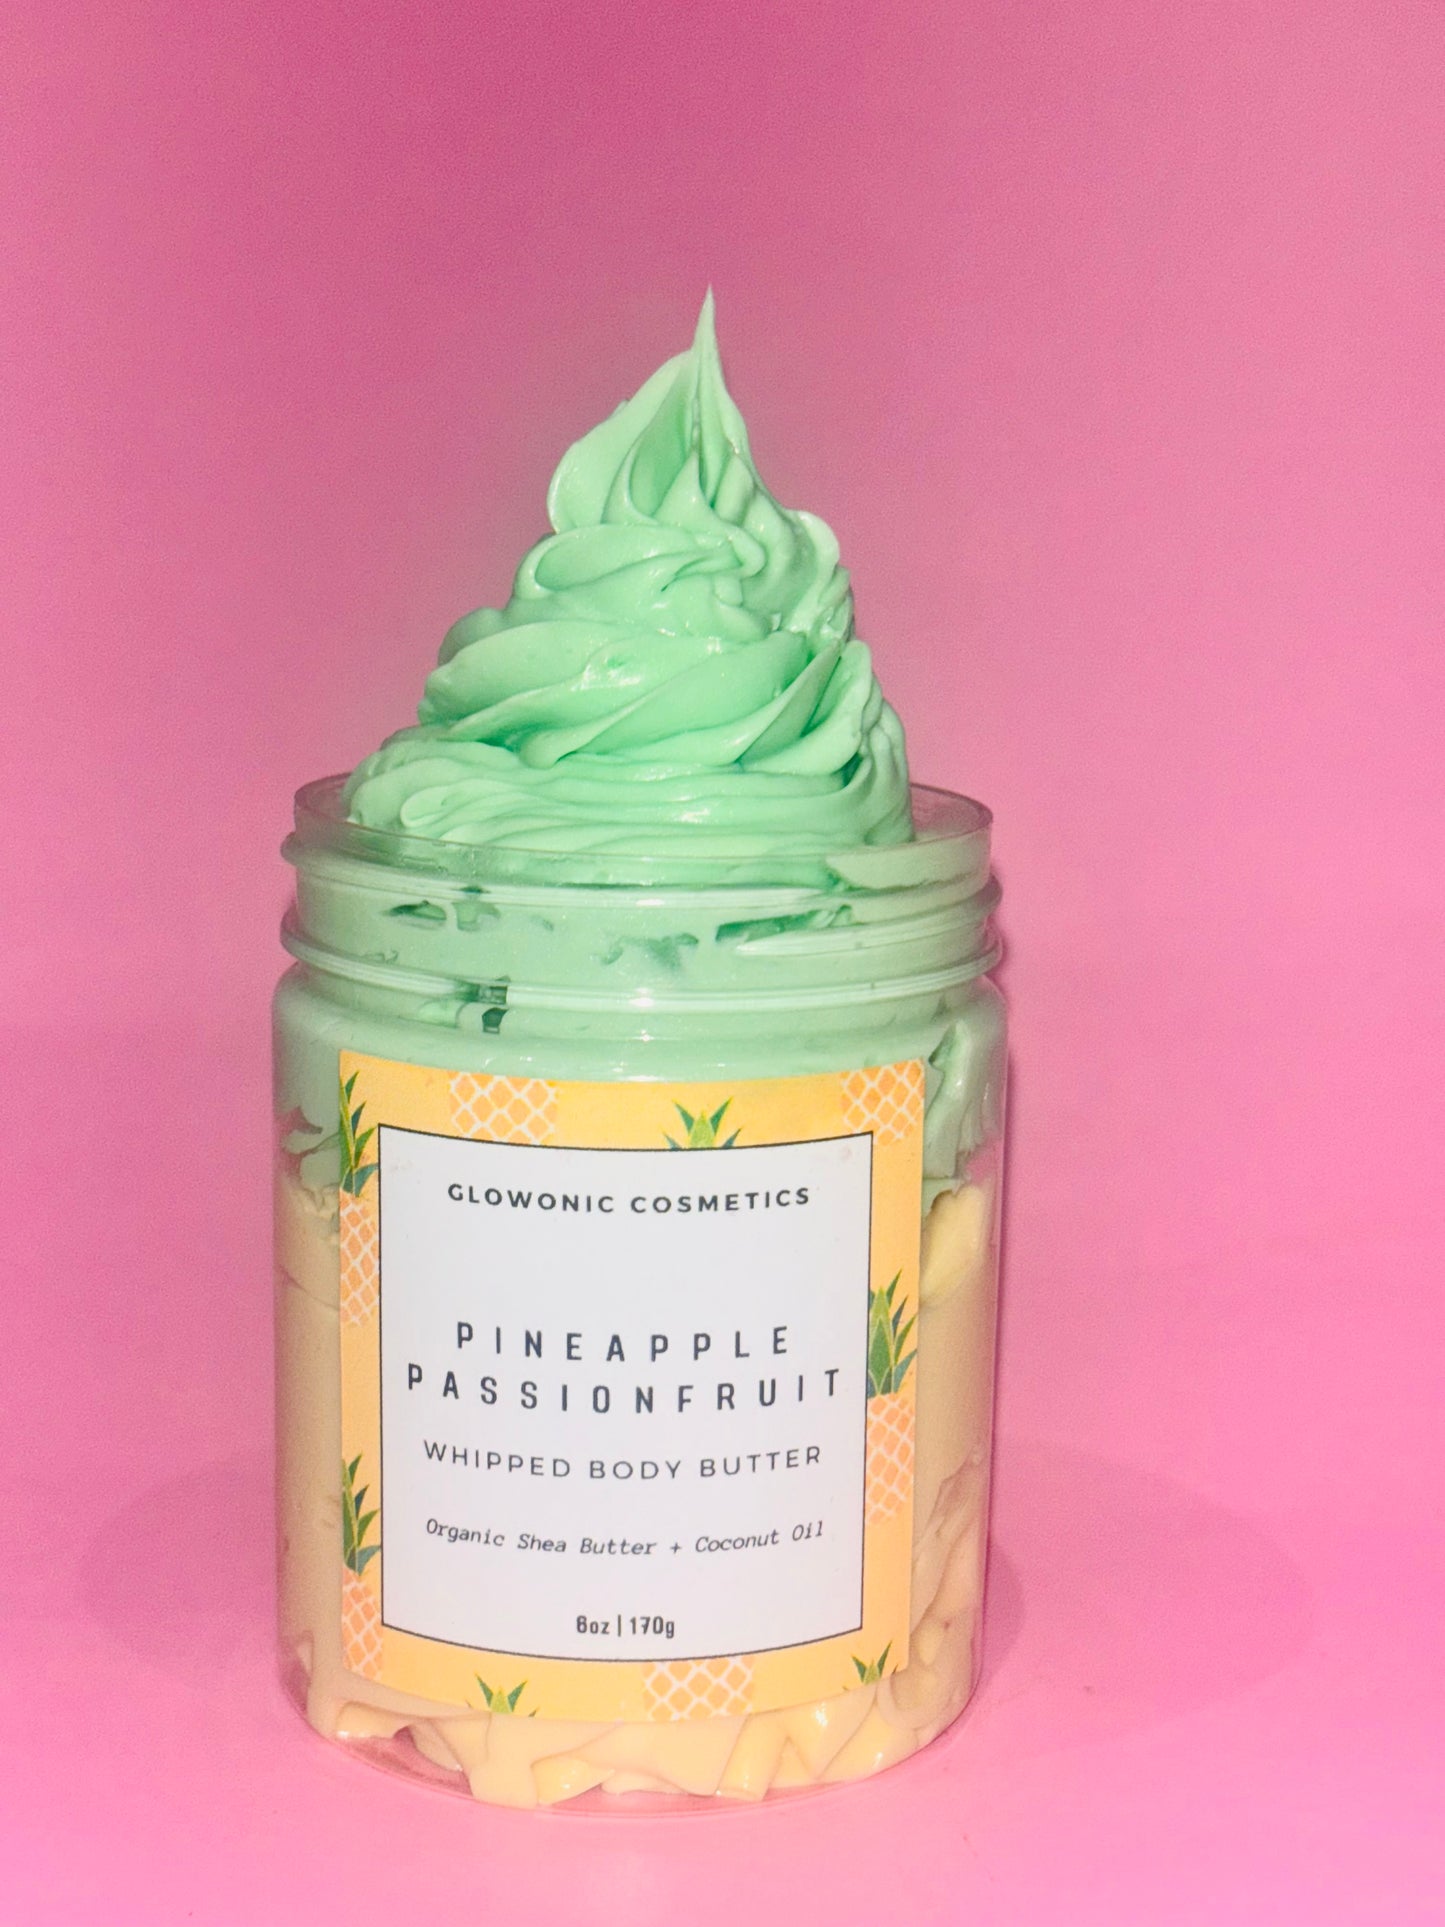 Pineapple Passionfruit Whipped Body Butter